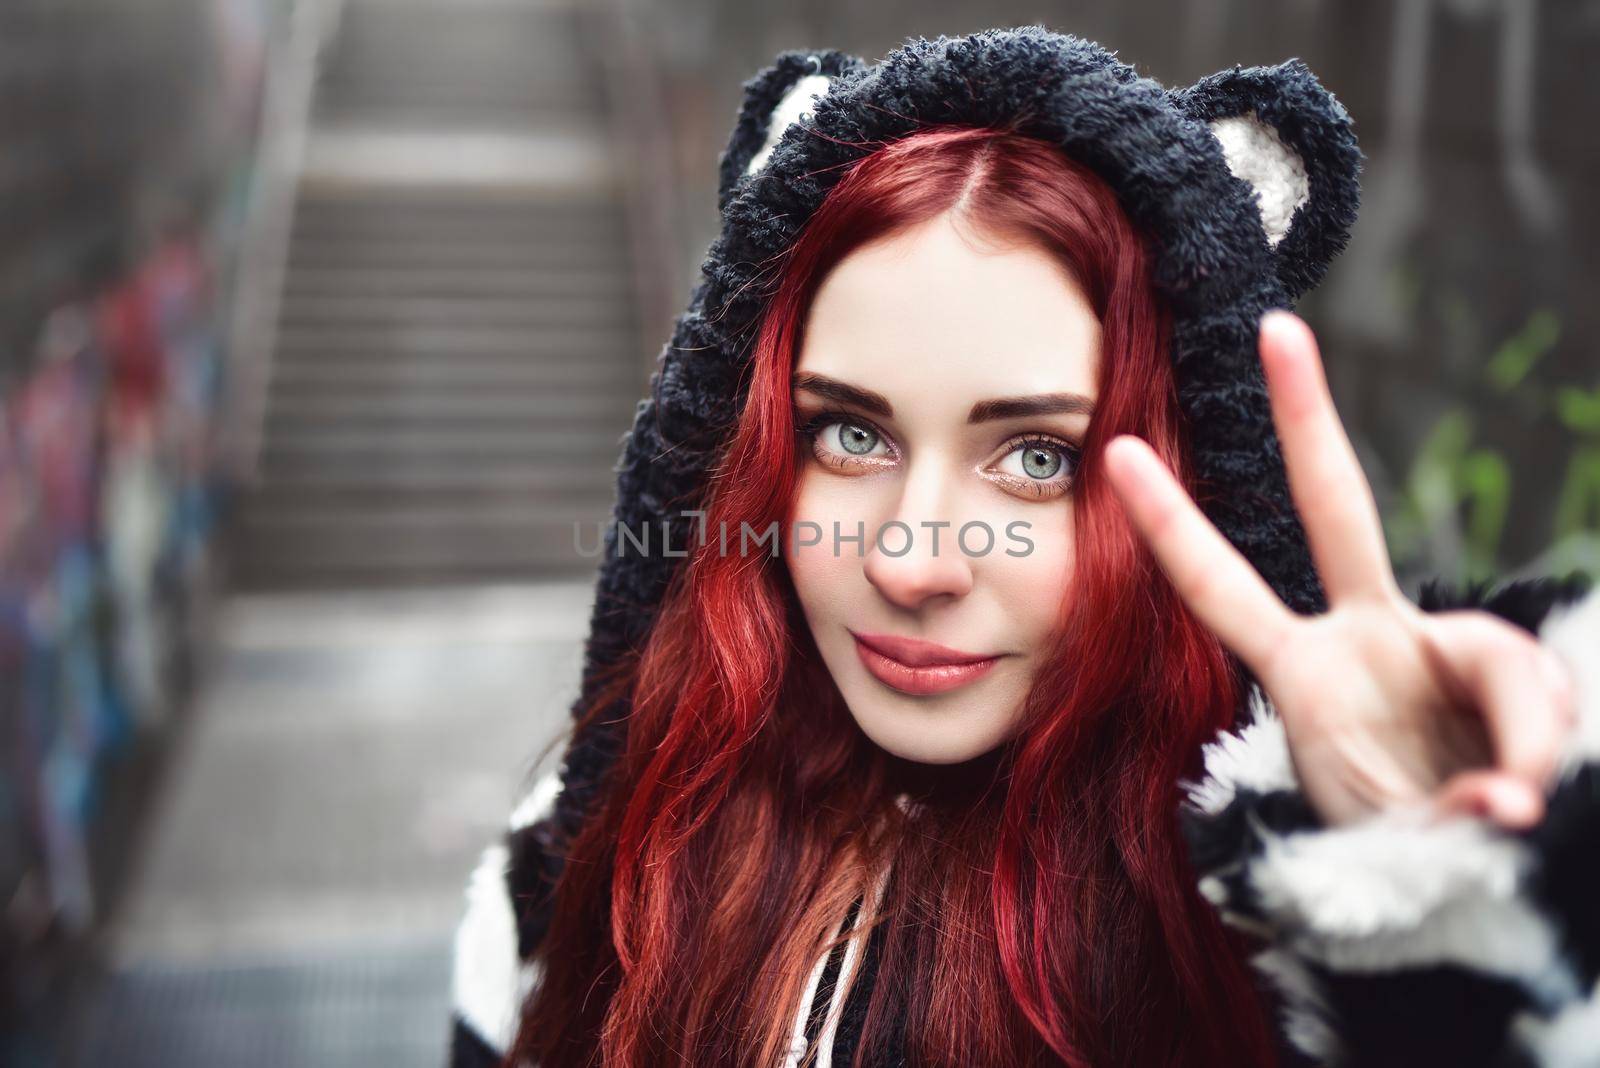 Close up portrait of cheerful playful girl, who is gesturing peace sign and smiles. She is wearing hoody, walking outdoors throught underground passage